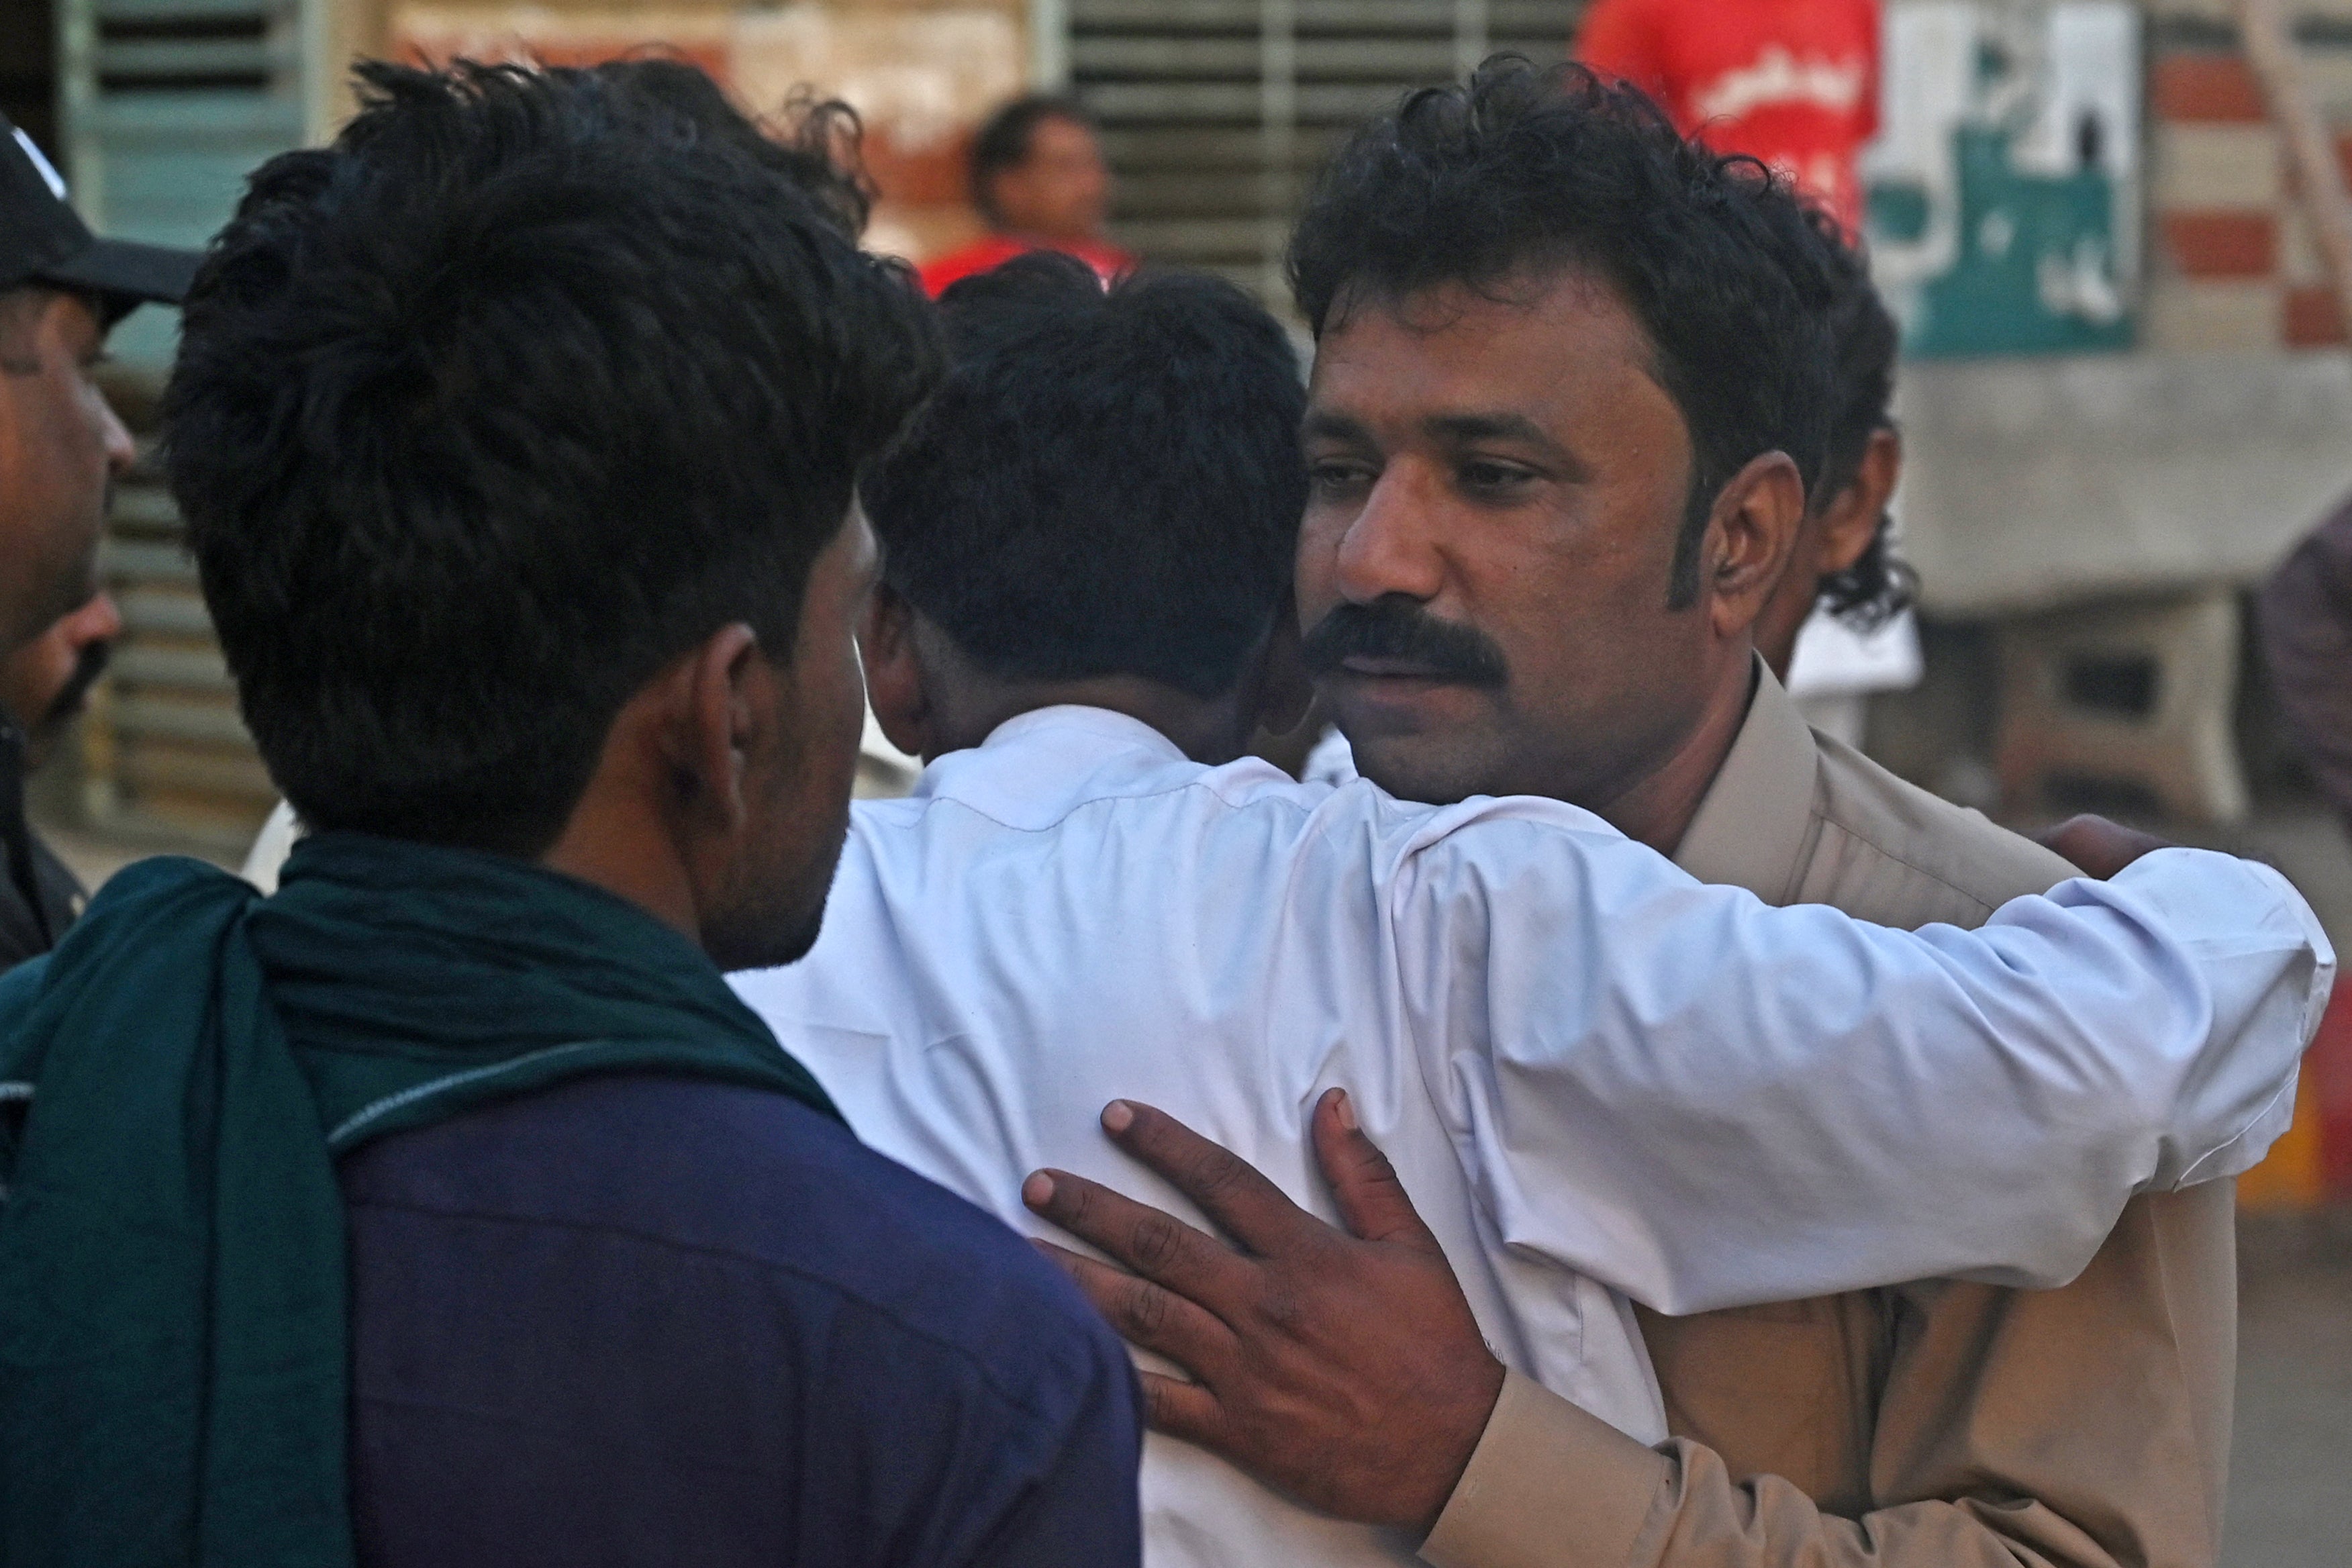 Relatives of religious pilgrims, who died in a truck accident, mourn in Karachi